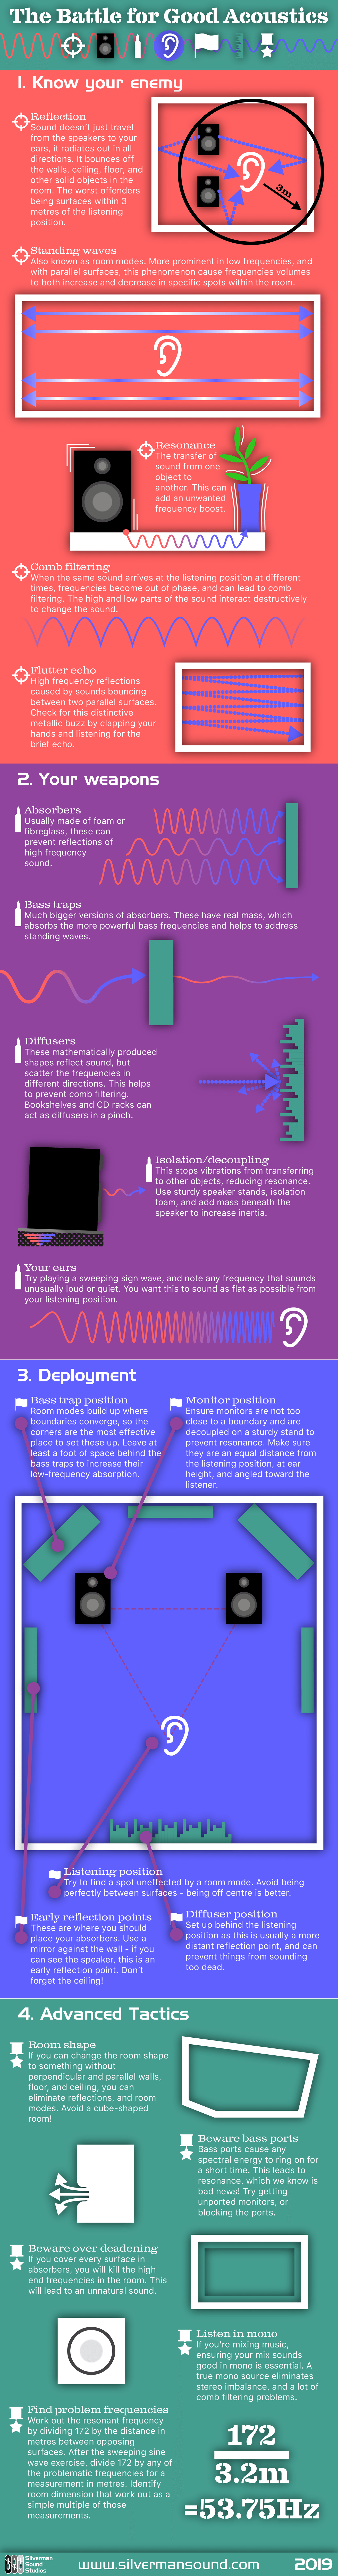 The Battle For Good Acoustics Infographic